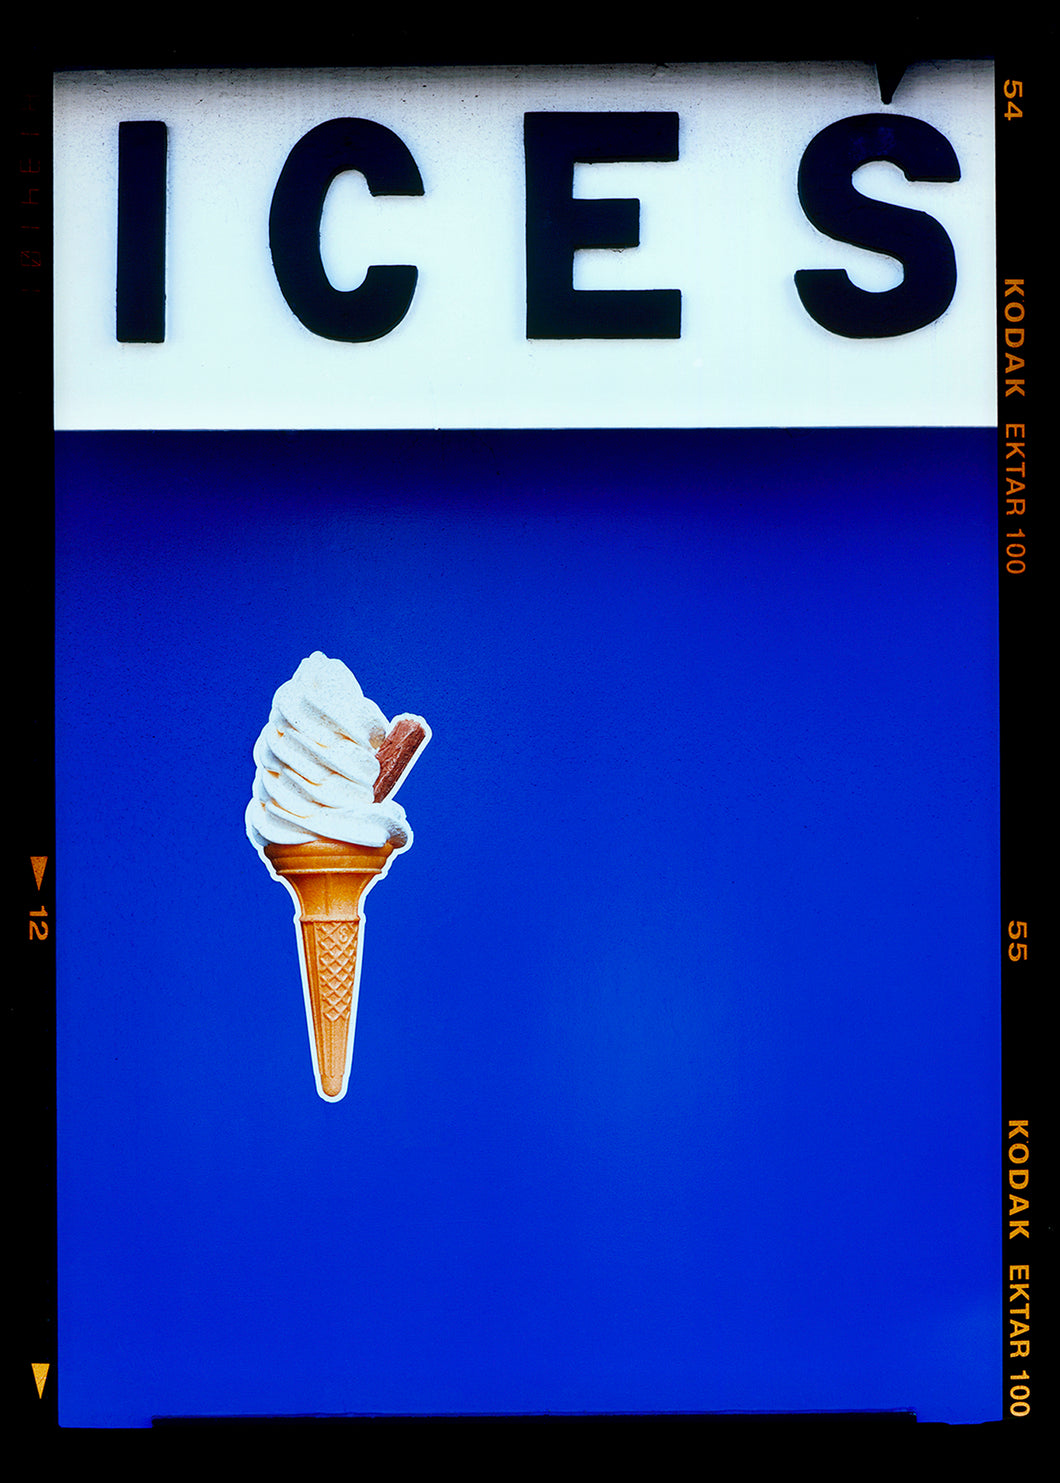 Photograph by Richard Heeps. 'Ices', photographed at Bexhill-on-Sea. On one hand it's about the joys of the British seaside, the iconic ice cream cone, it's incredibly simple but on the somehow its created a conceptual piece of art, the ice cream cone suspended in a sea of blue with the bold graphic typography.